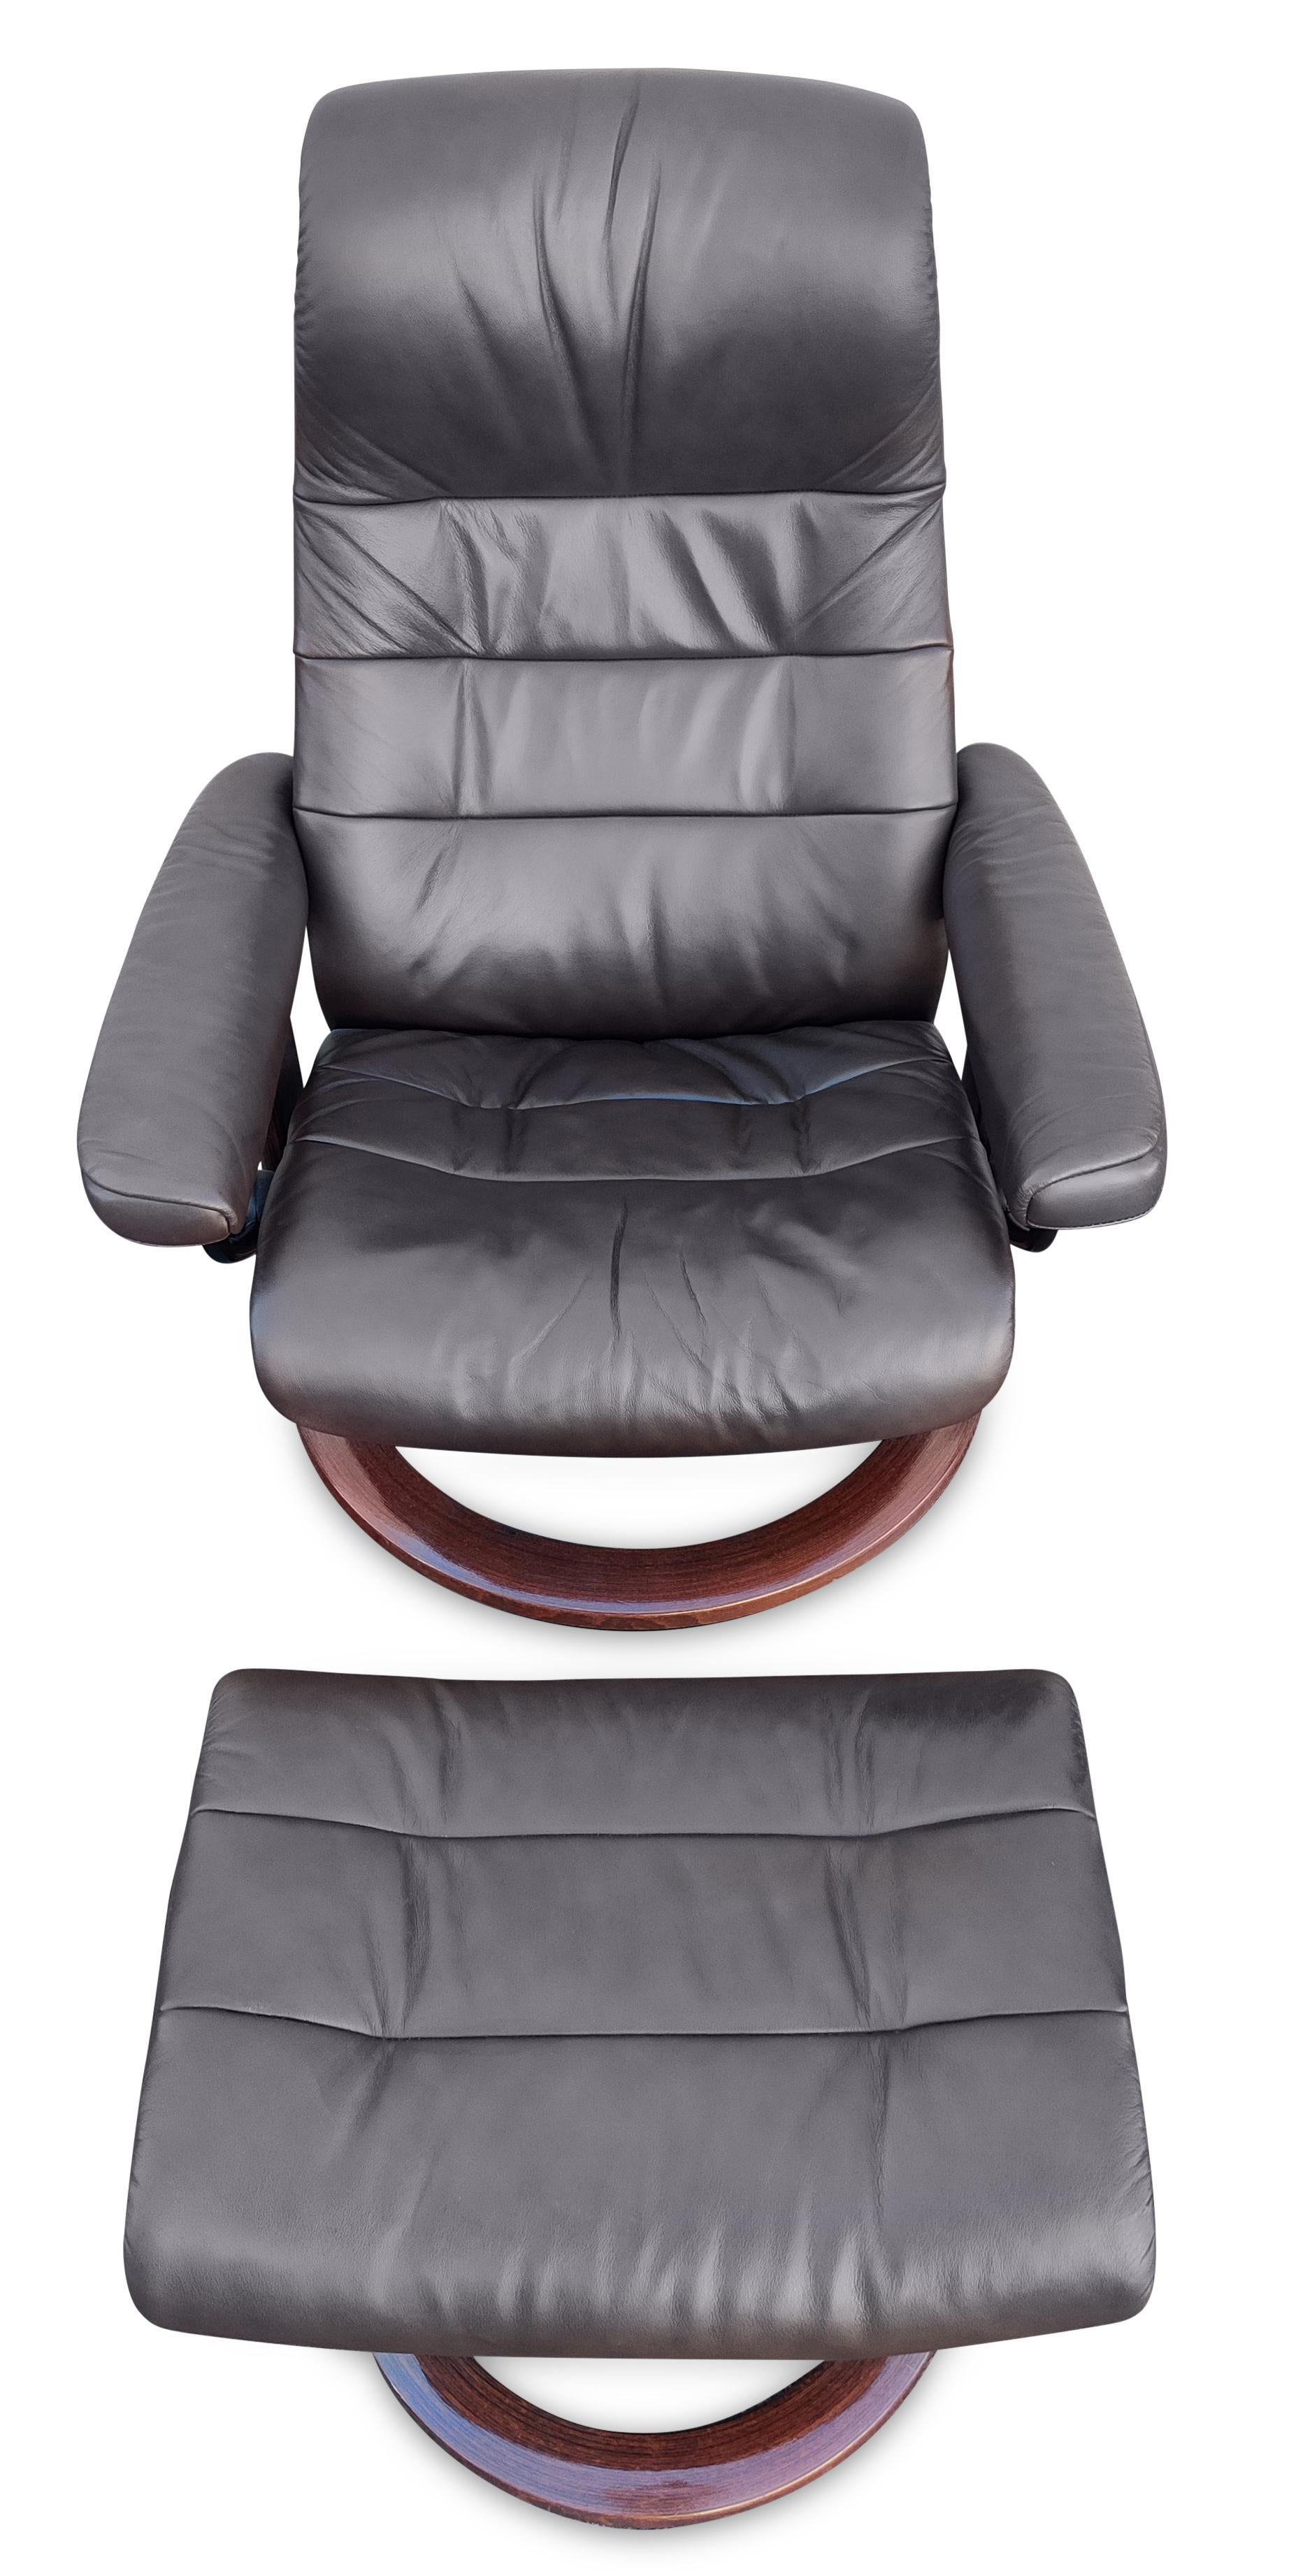 used stressless chairs